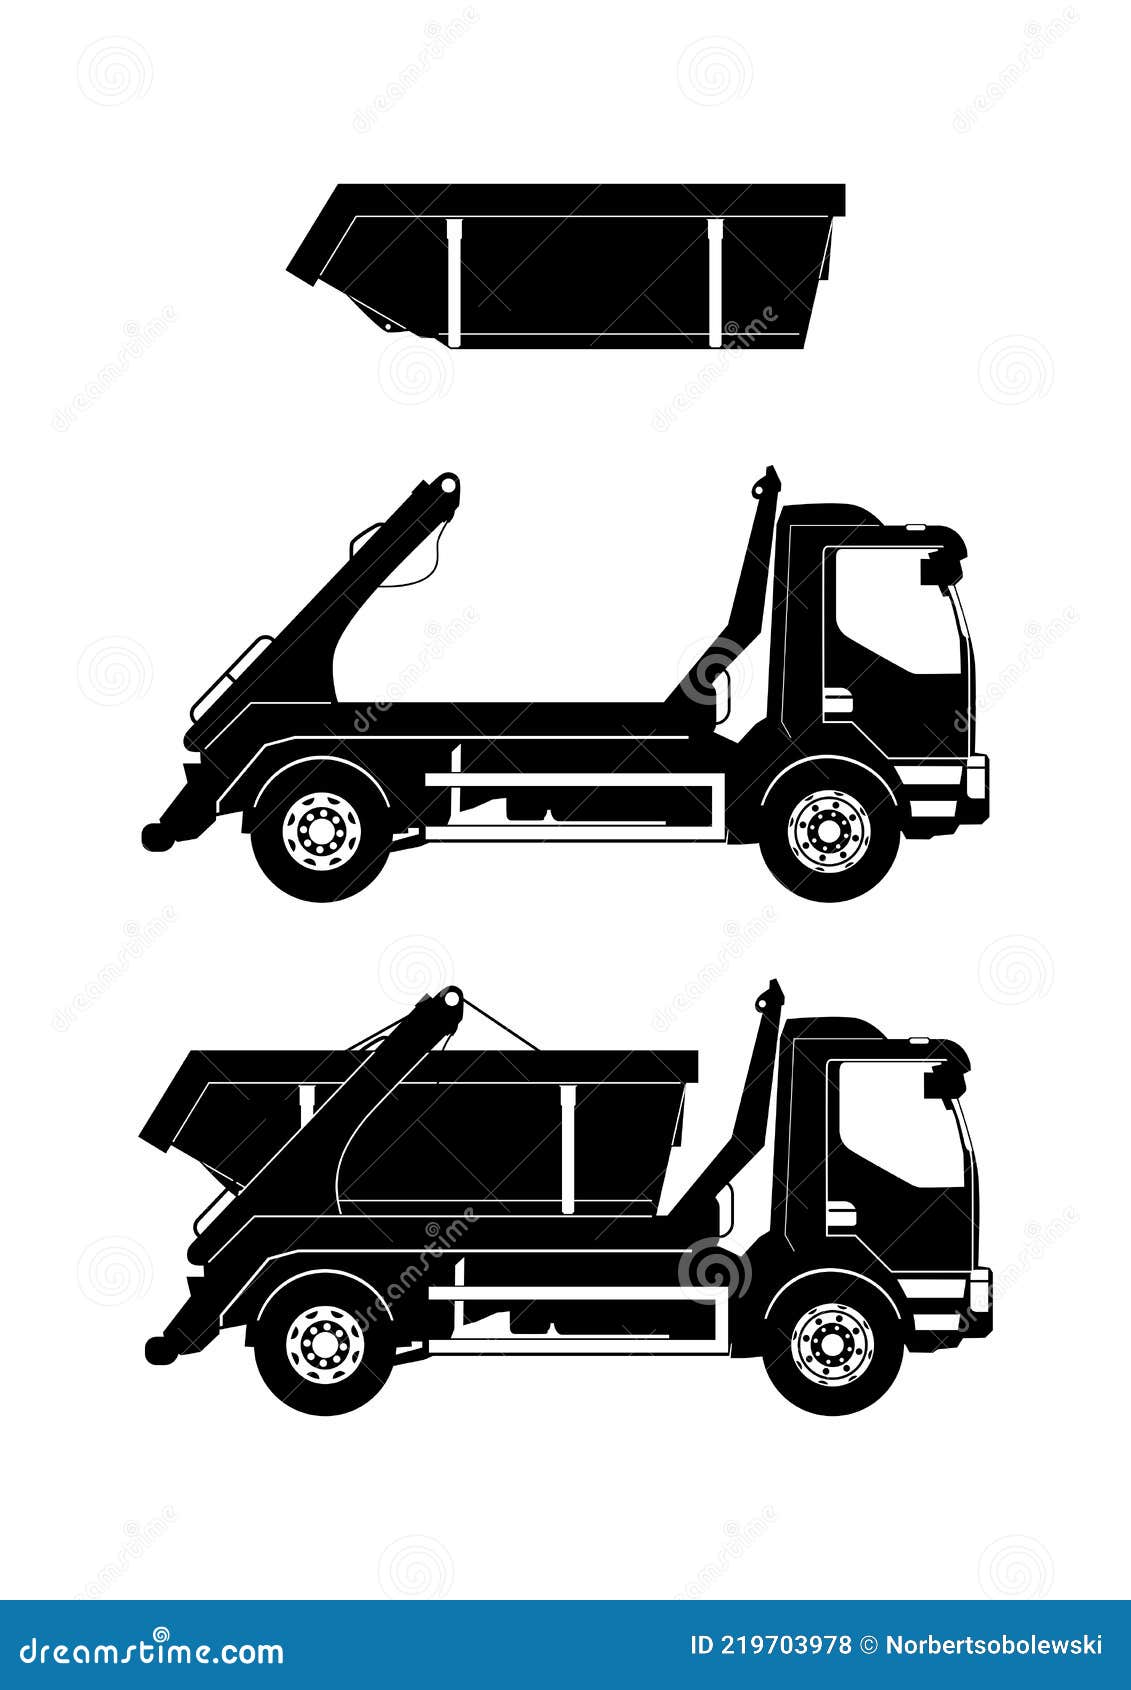 silhouette of a cantilever skip truck.